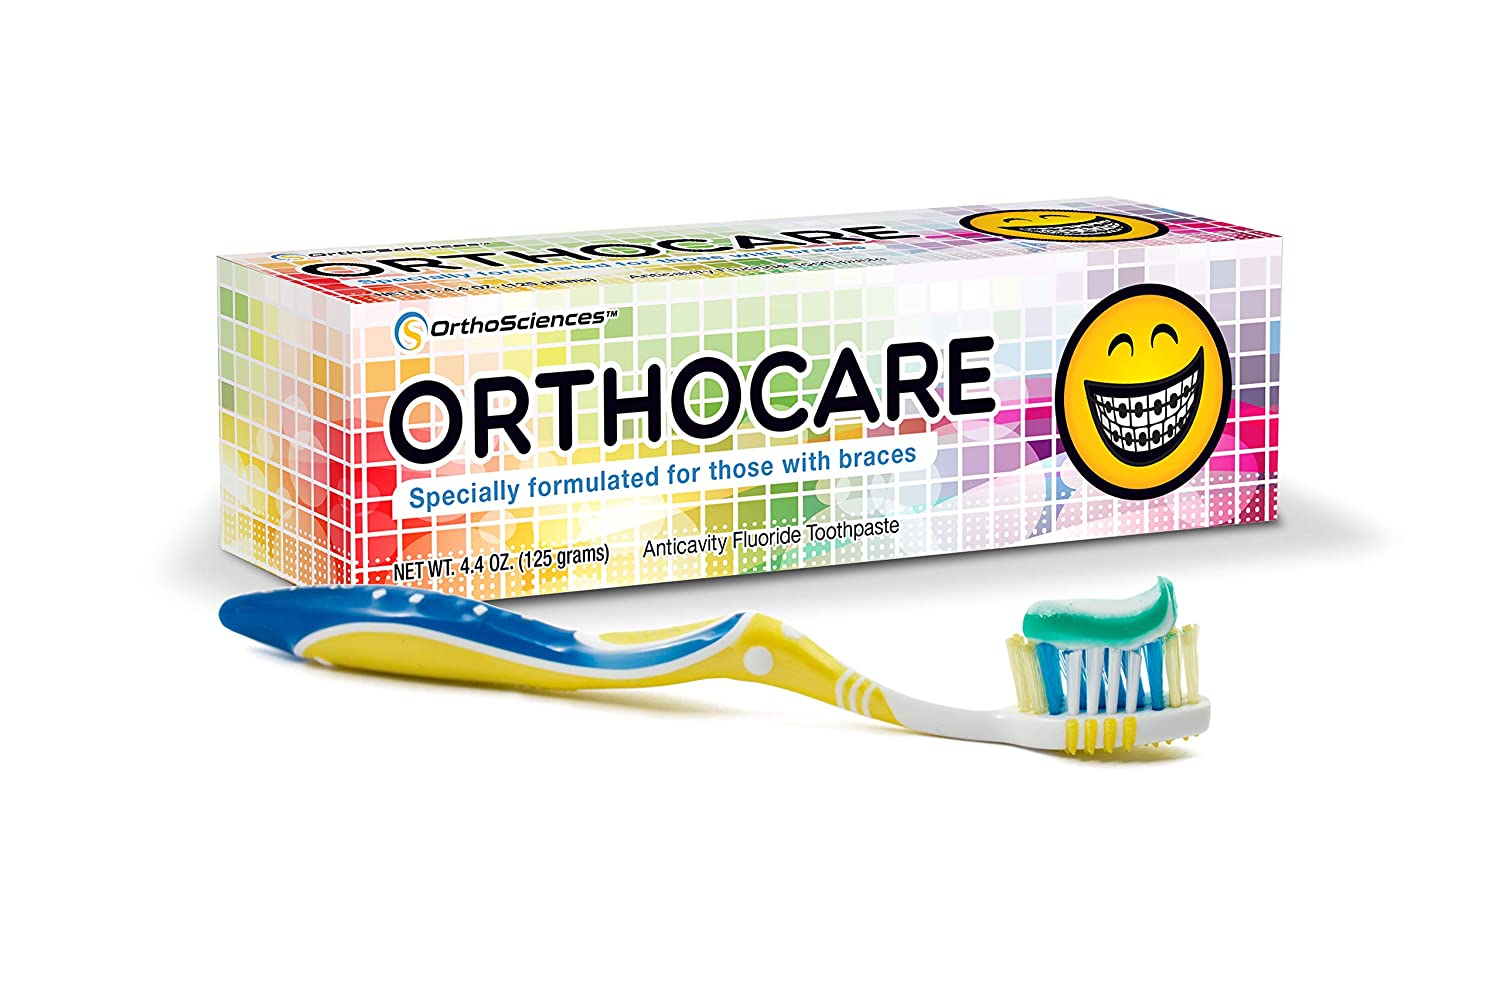 ORTHOCARE Toothpaste - image 3 of 5